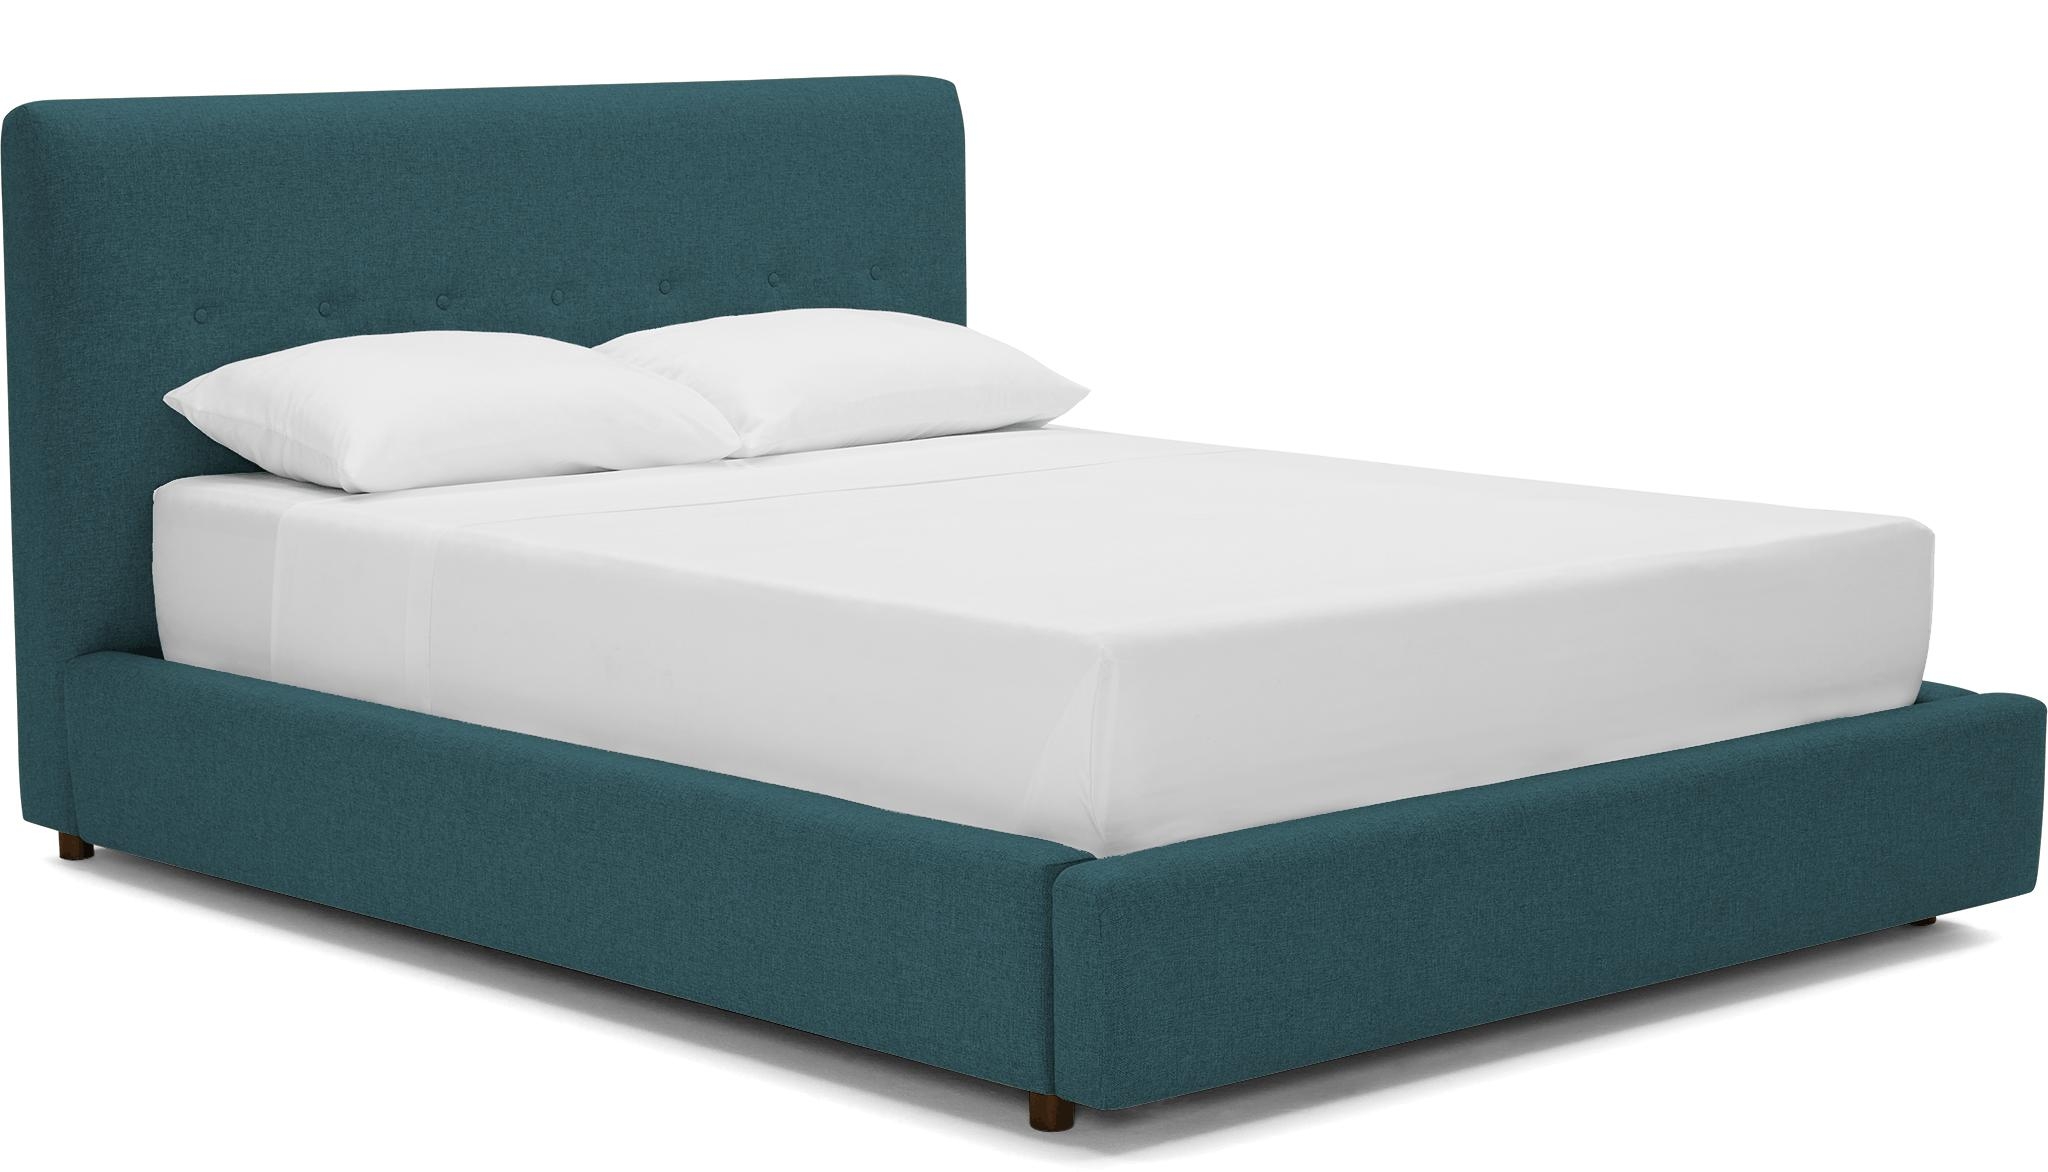 Blue Alvin Mid Century Modern Storage Bed - Cody Pacific - Mocha - Cal King - Image 1